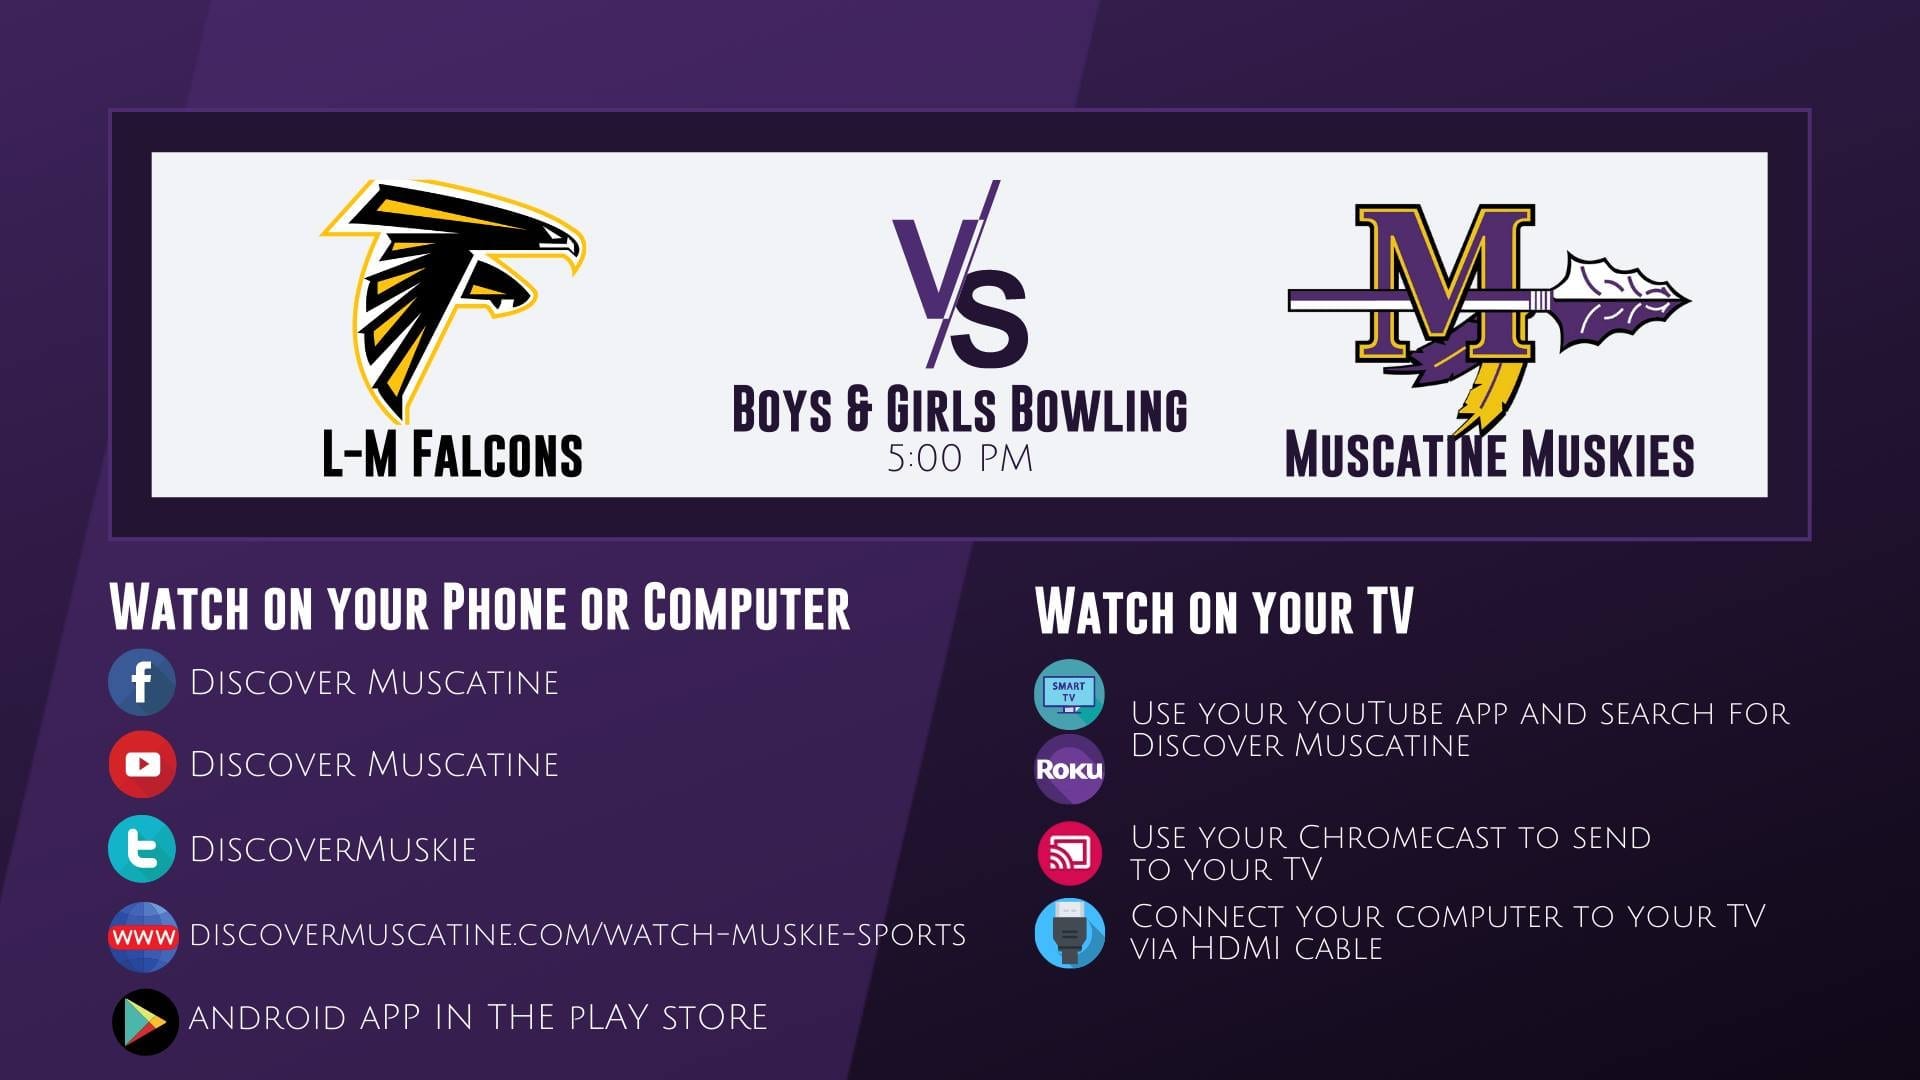 Muskie Boys and Girls Bowling vs L-M Falcons LIVE Broadcast